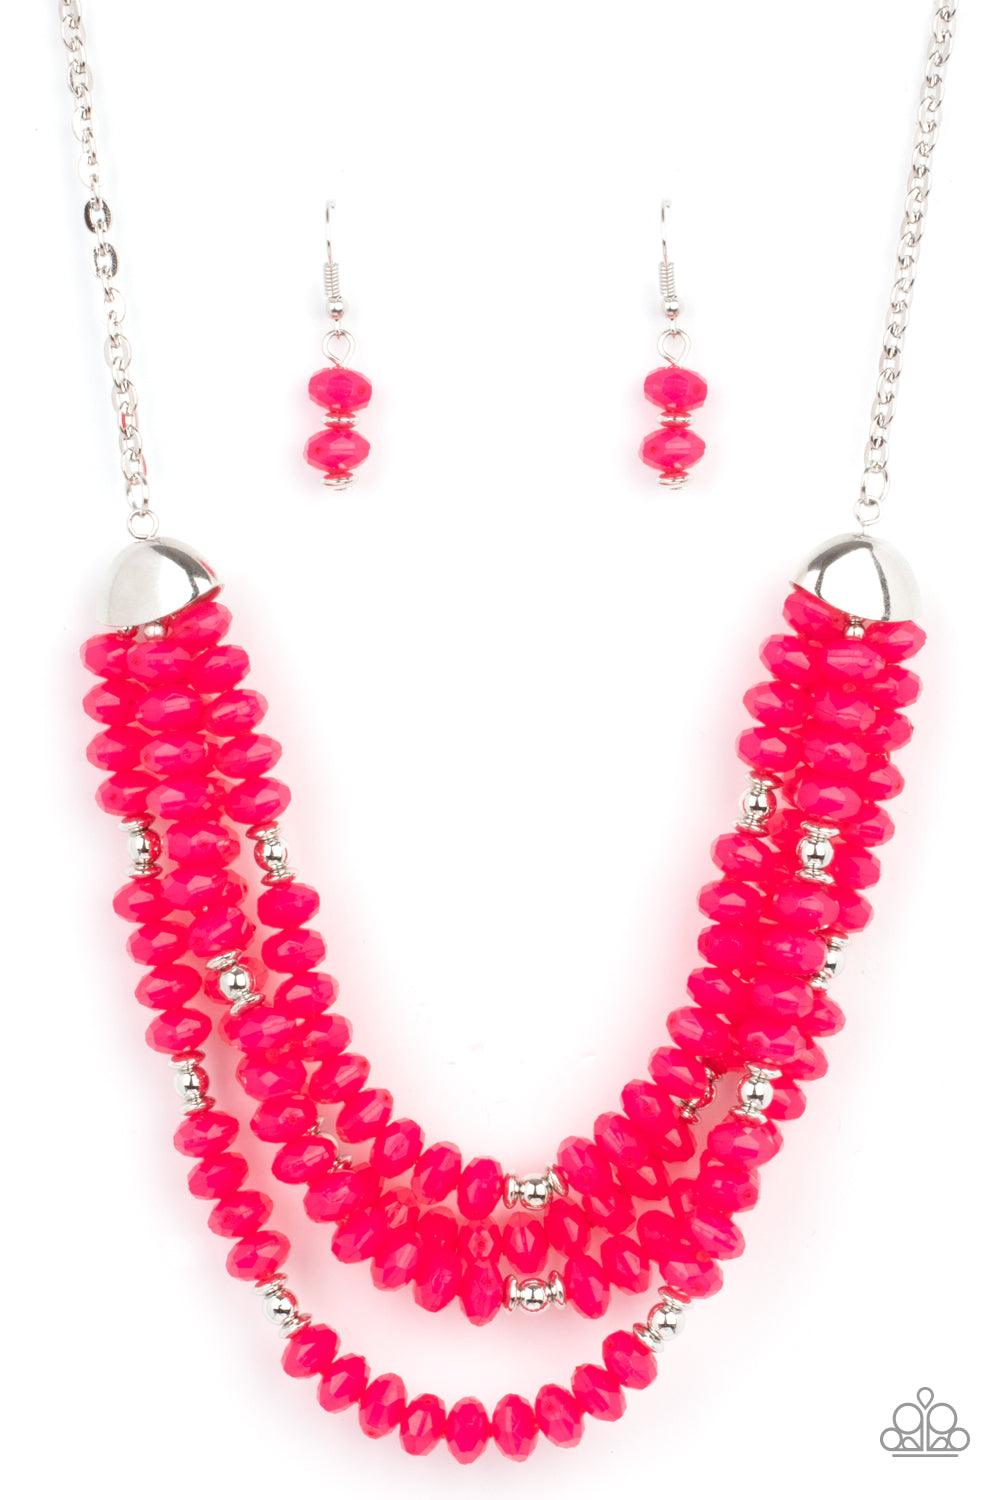 Paparazzi Accessories Best POSH-ible Taste - Pink Featuring bold silver fittings, a whimsical collection of faceted pink opaque crystal-like beads and dainty silver beads are threaded along invisible wires below the collar, creating vivacious layers. Feat